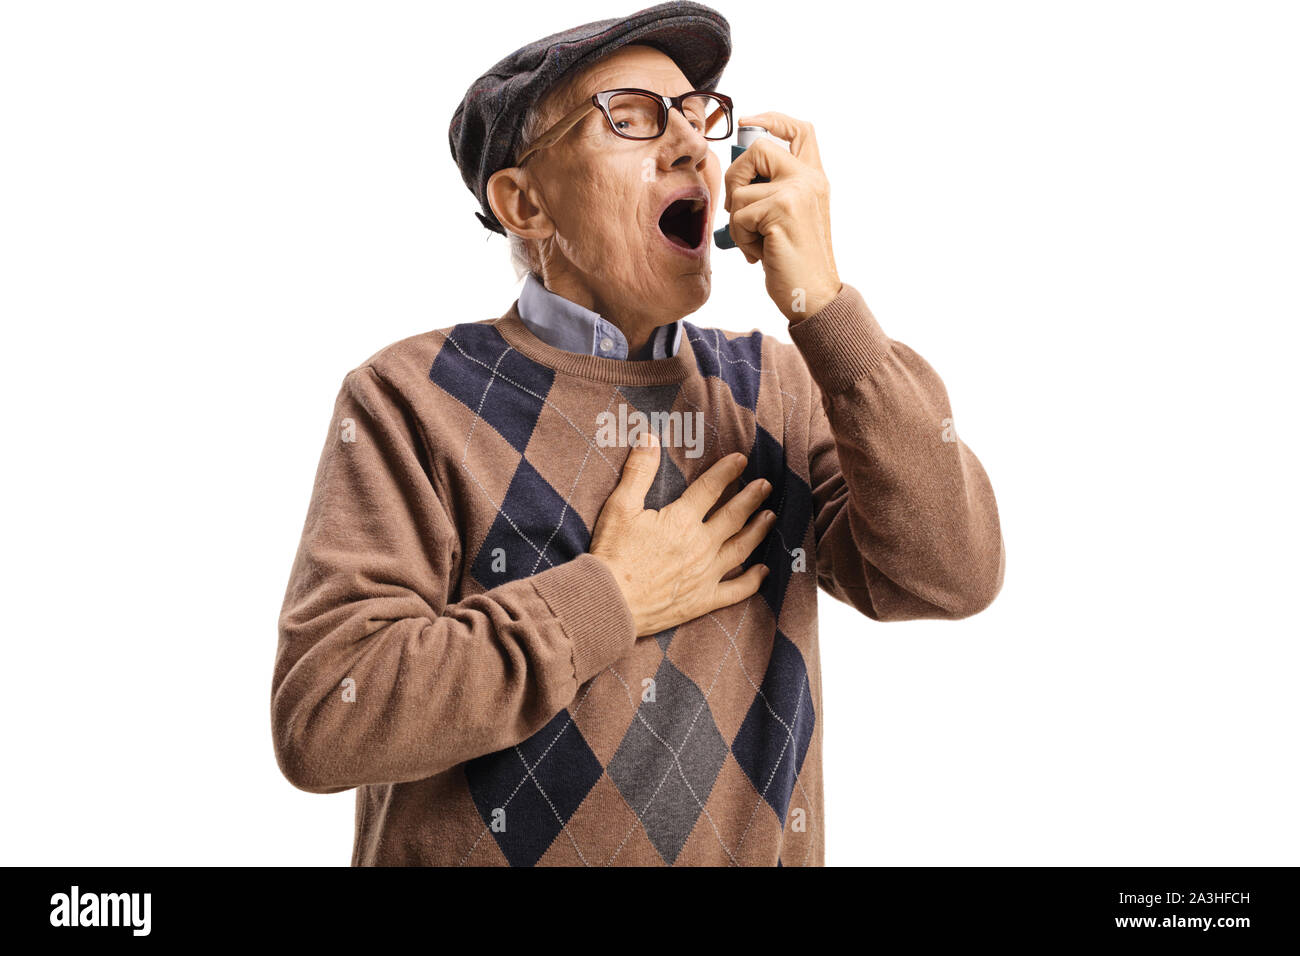 Senior man with asthma using an inhaler isolated on white background Stock Photo